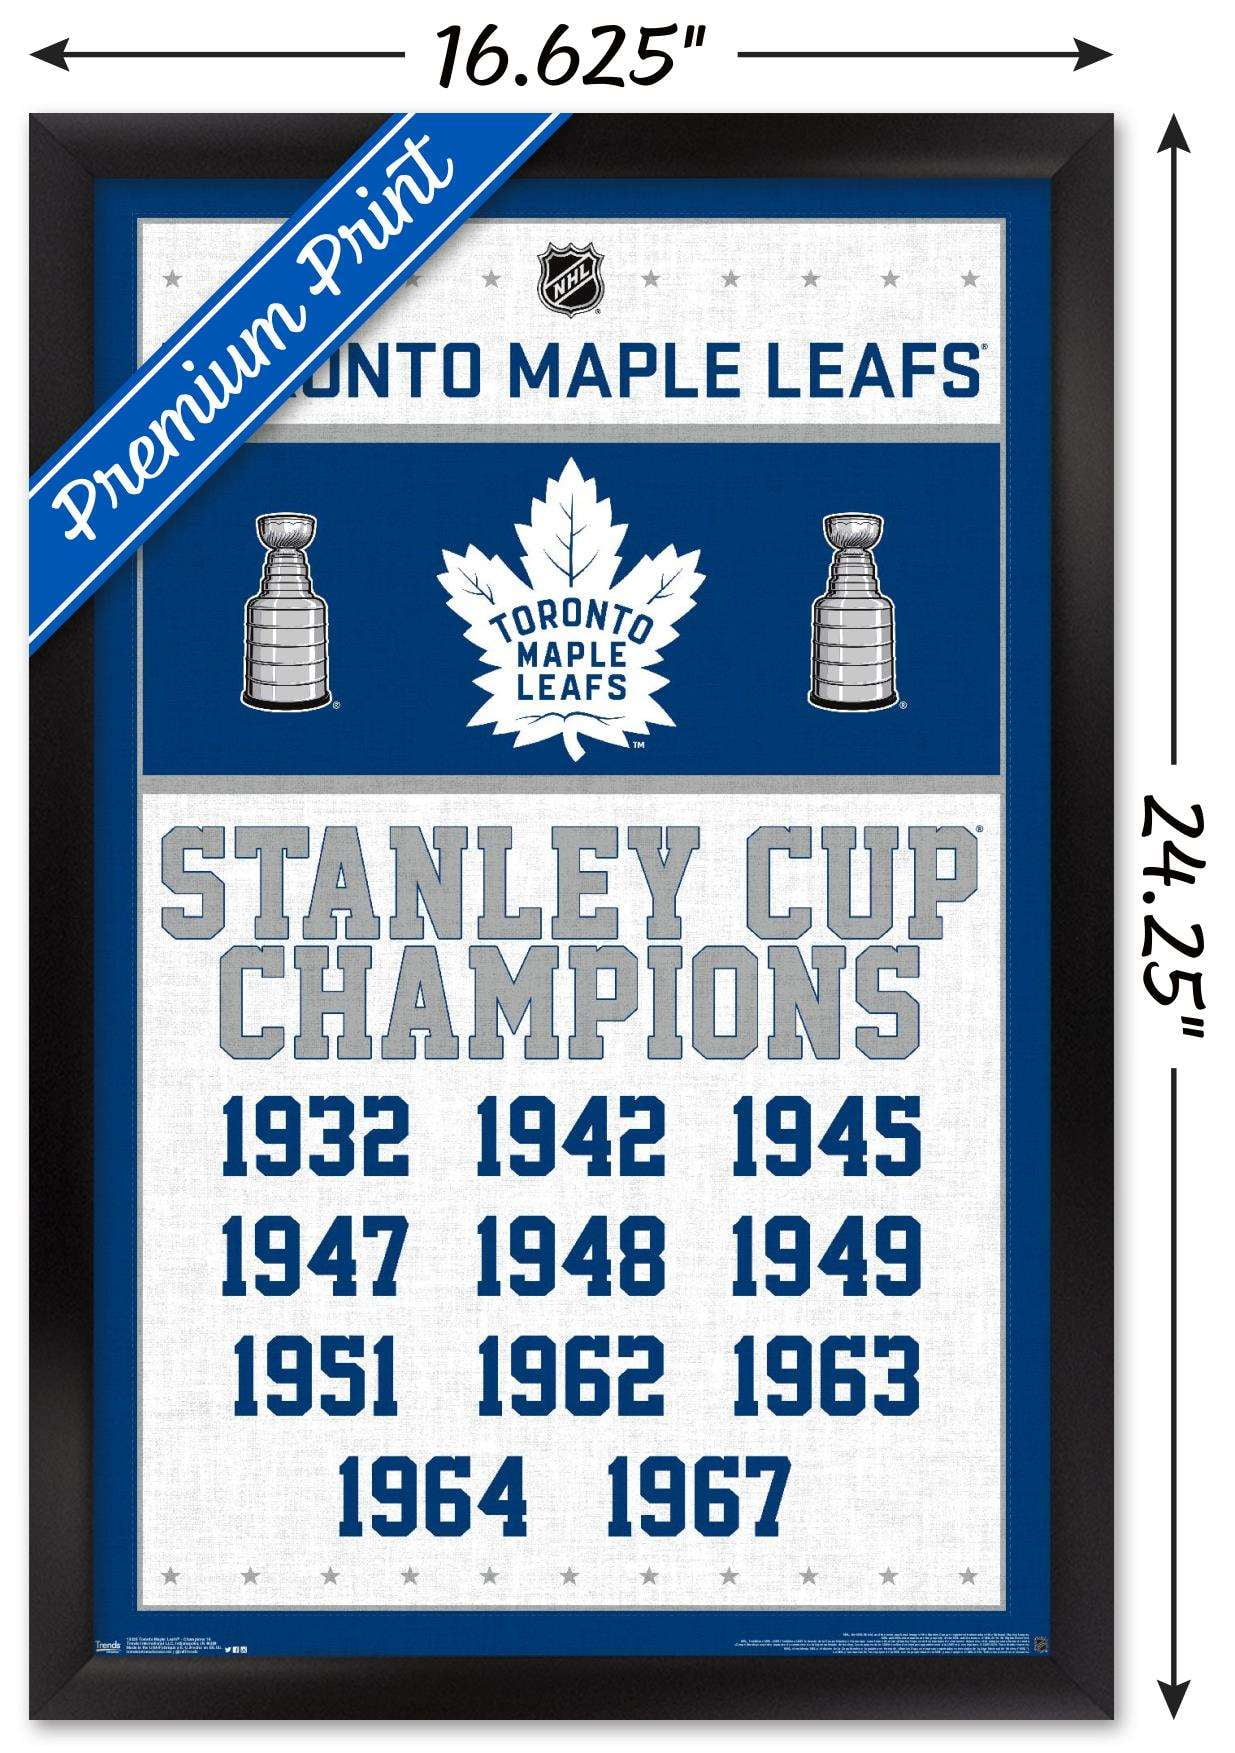 Toronto Maple Leafs - Stanley Cup Champions 1962